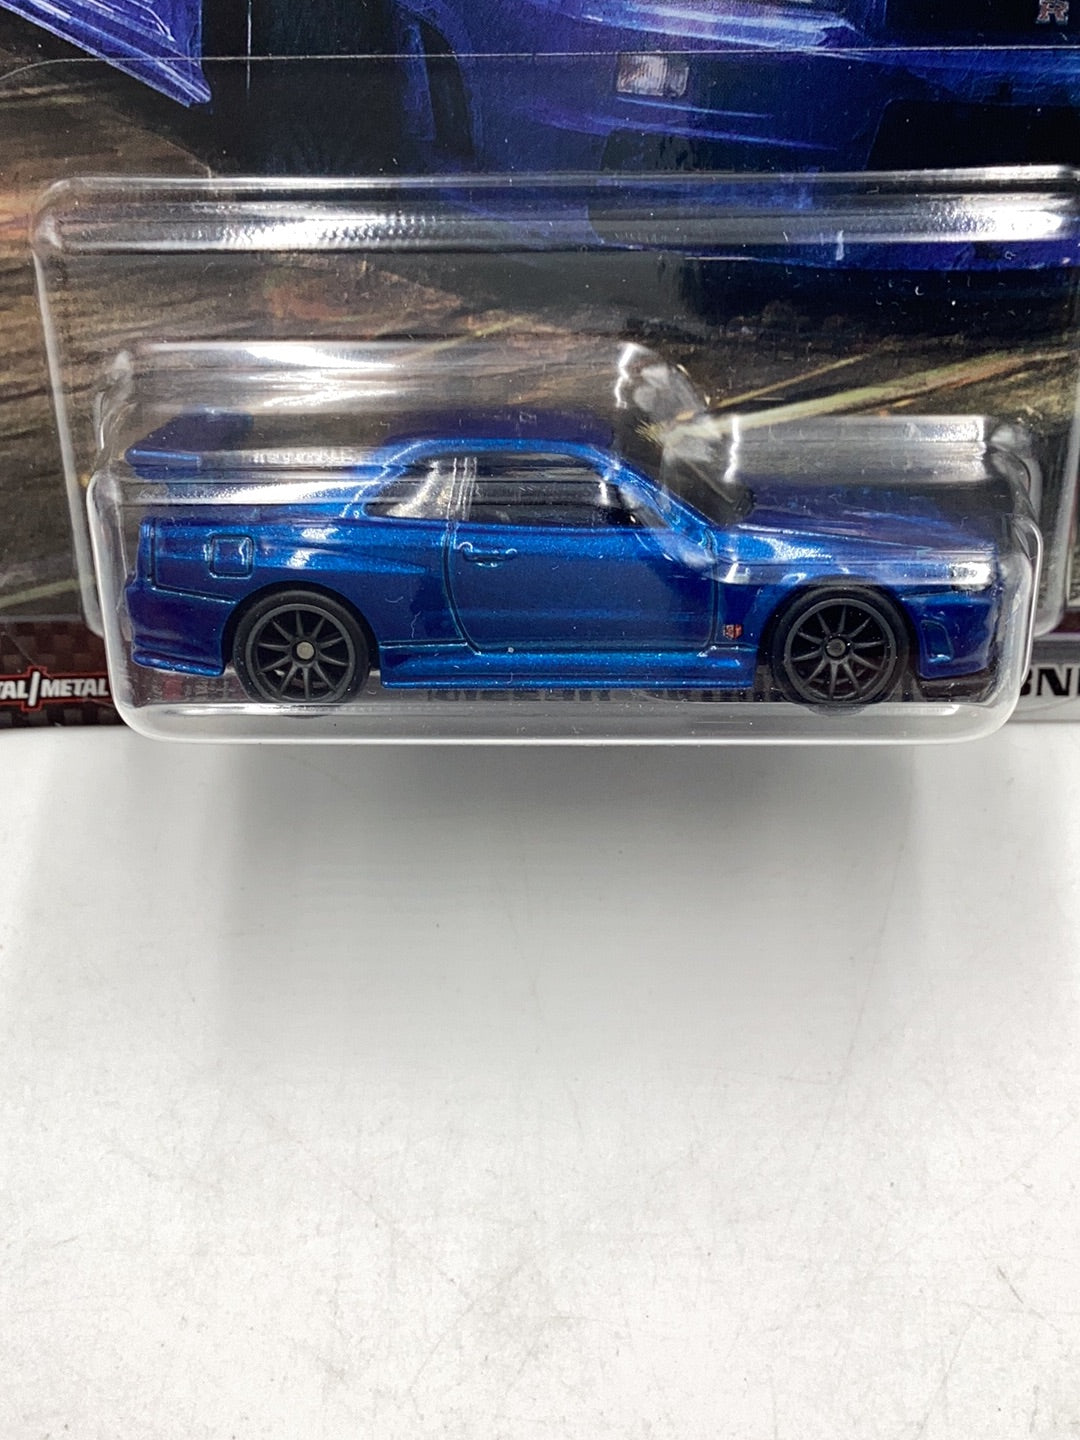 Hot wheels premium fast and furious Fast Superstars 1/5 Nissan skyline GTR BNR34 with protector